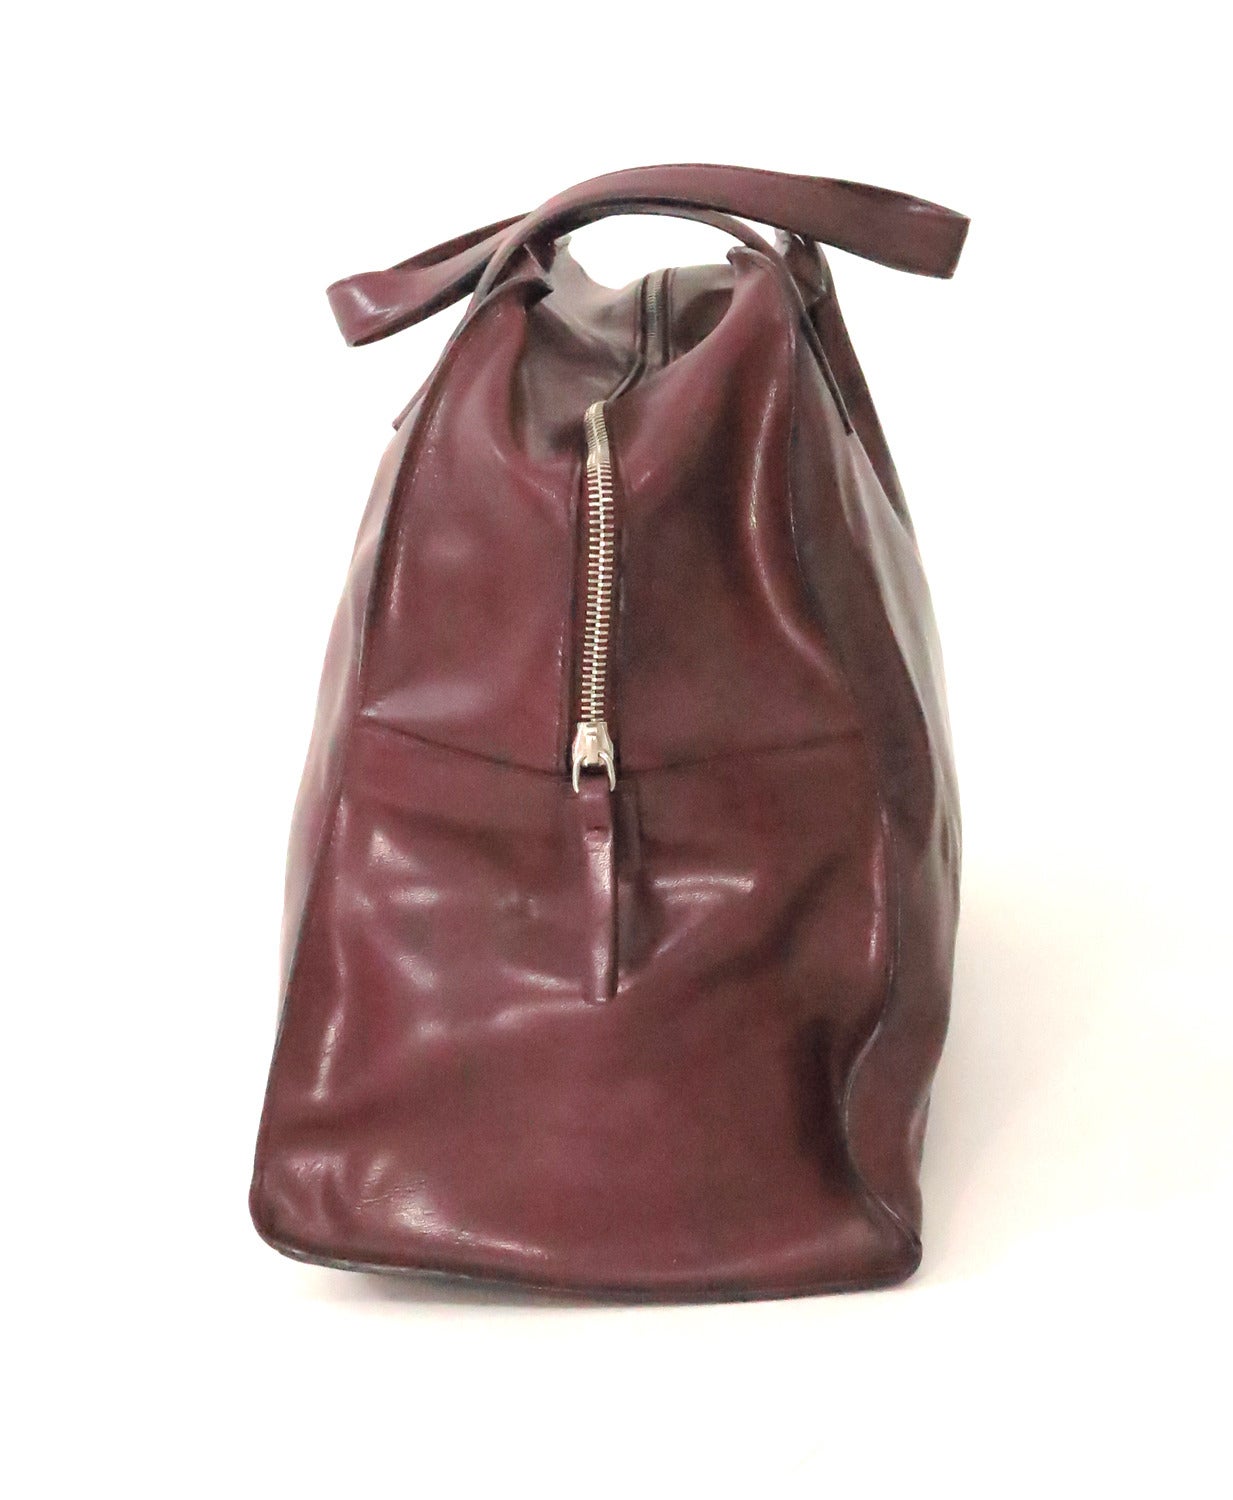 Strenesse Gabriele Strehle burgundy leather double handle tote bag For ...